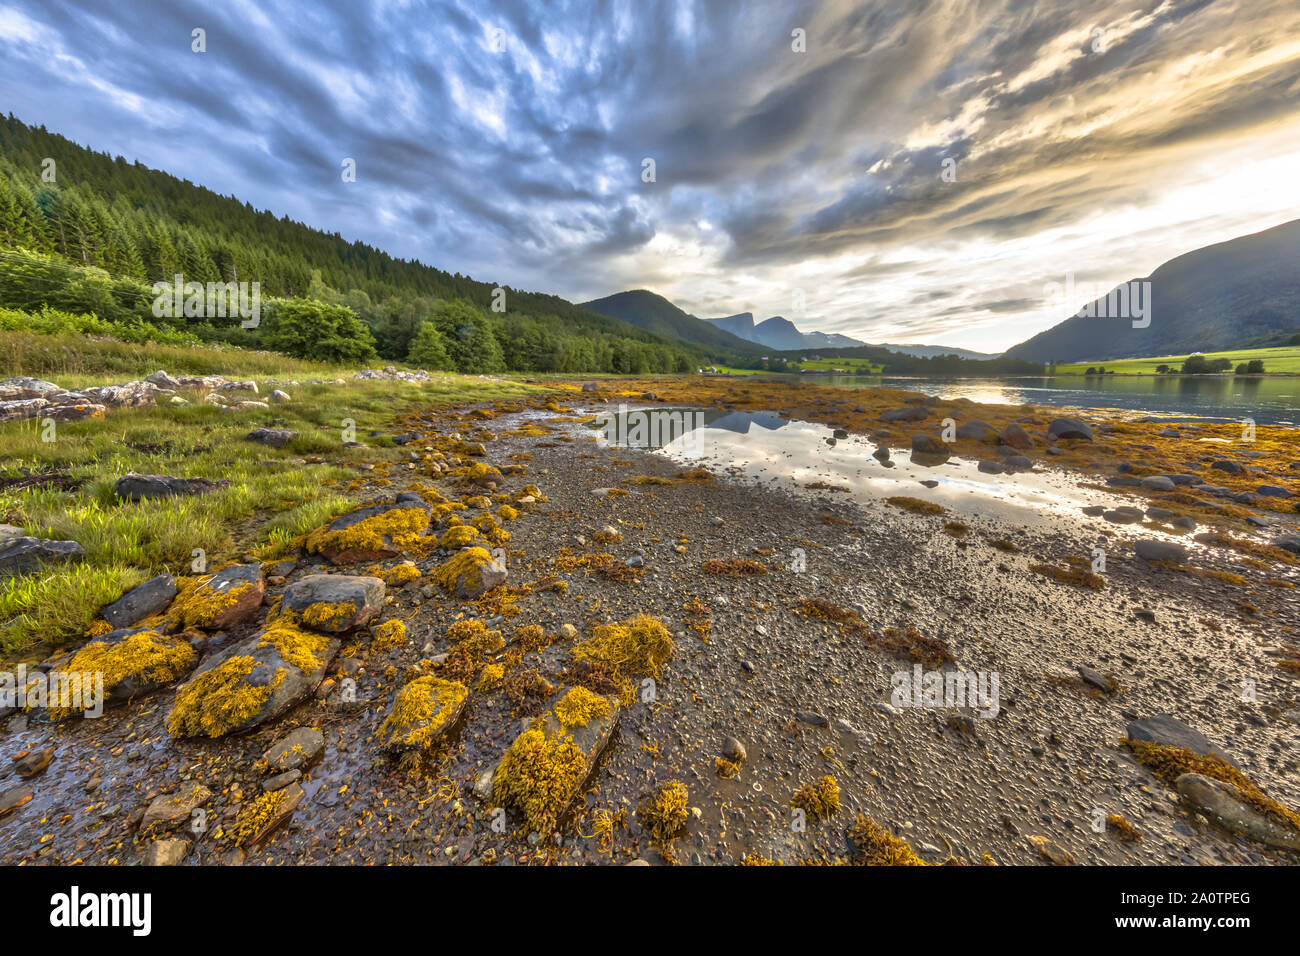 Fjord landscape with mountains backdrop. Tidal zone with rocks and stones at low tide on Eidsbygda peninsula Norway Stock Photo